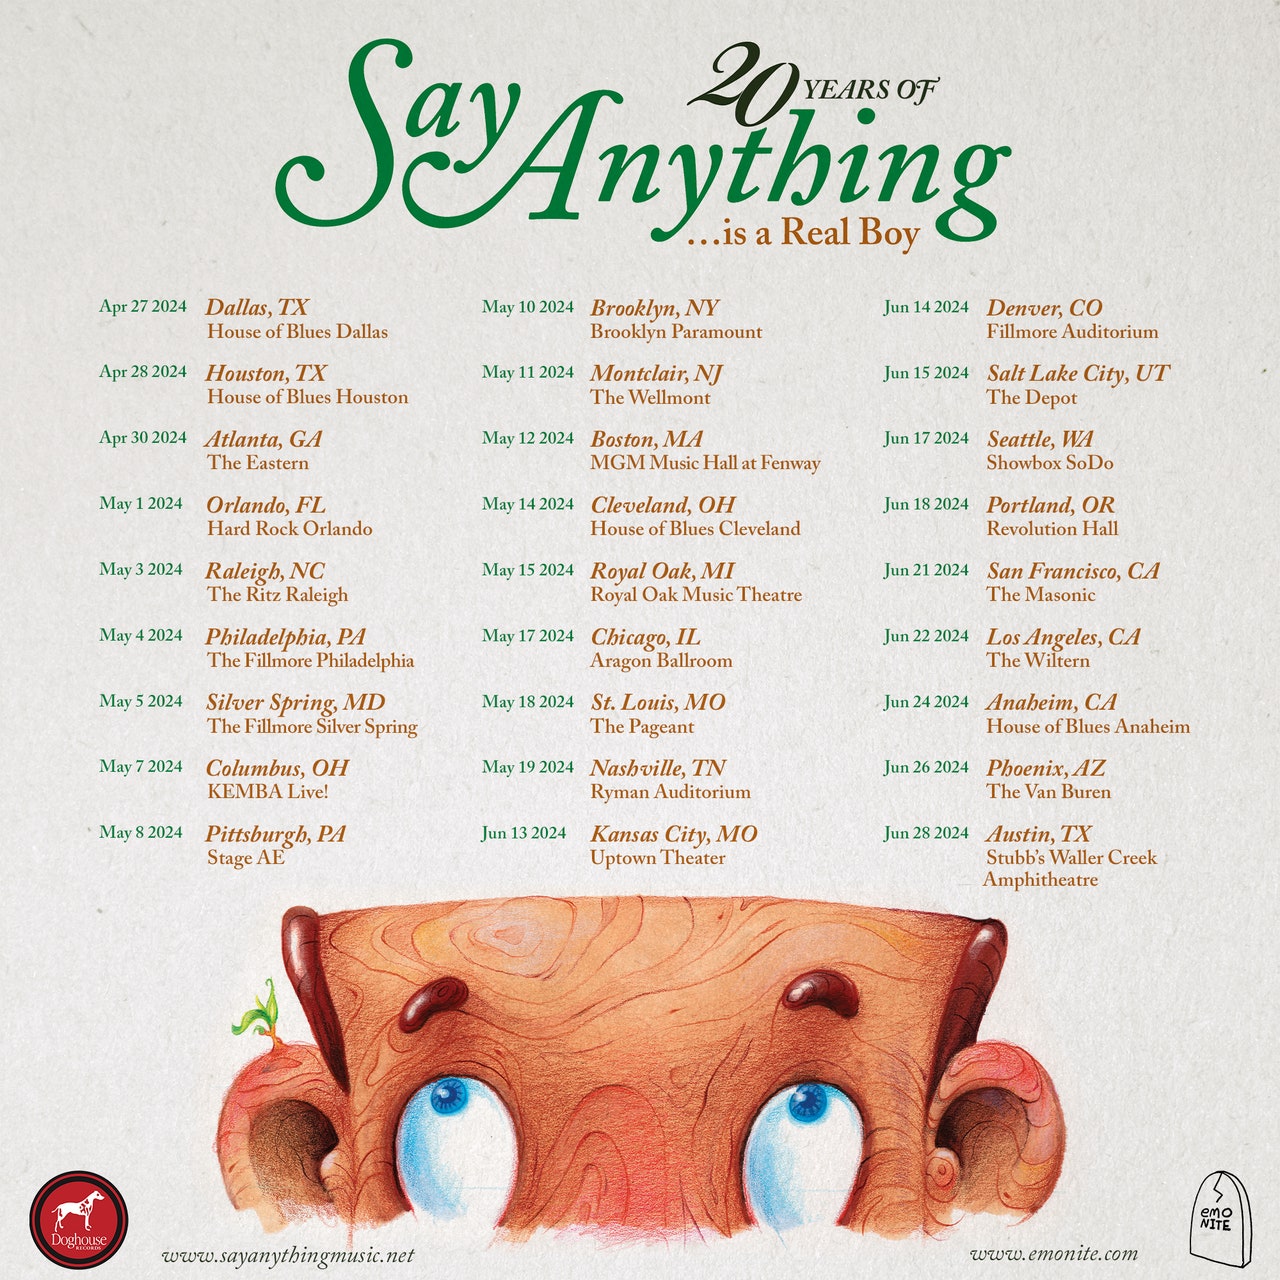 Say Anything - Is A Real Boy 20th Anniversary Tour at Fillmore Auditorium Denver Tickets